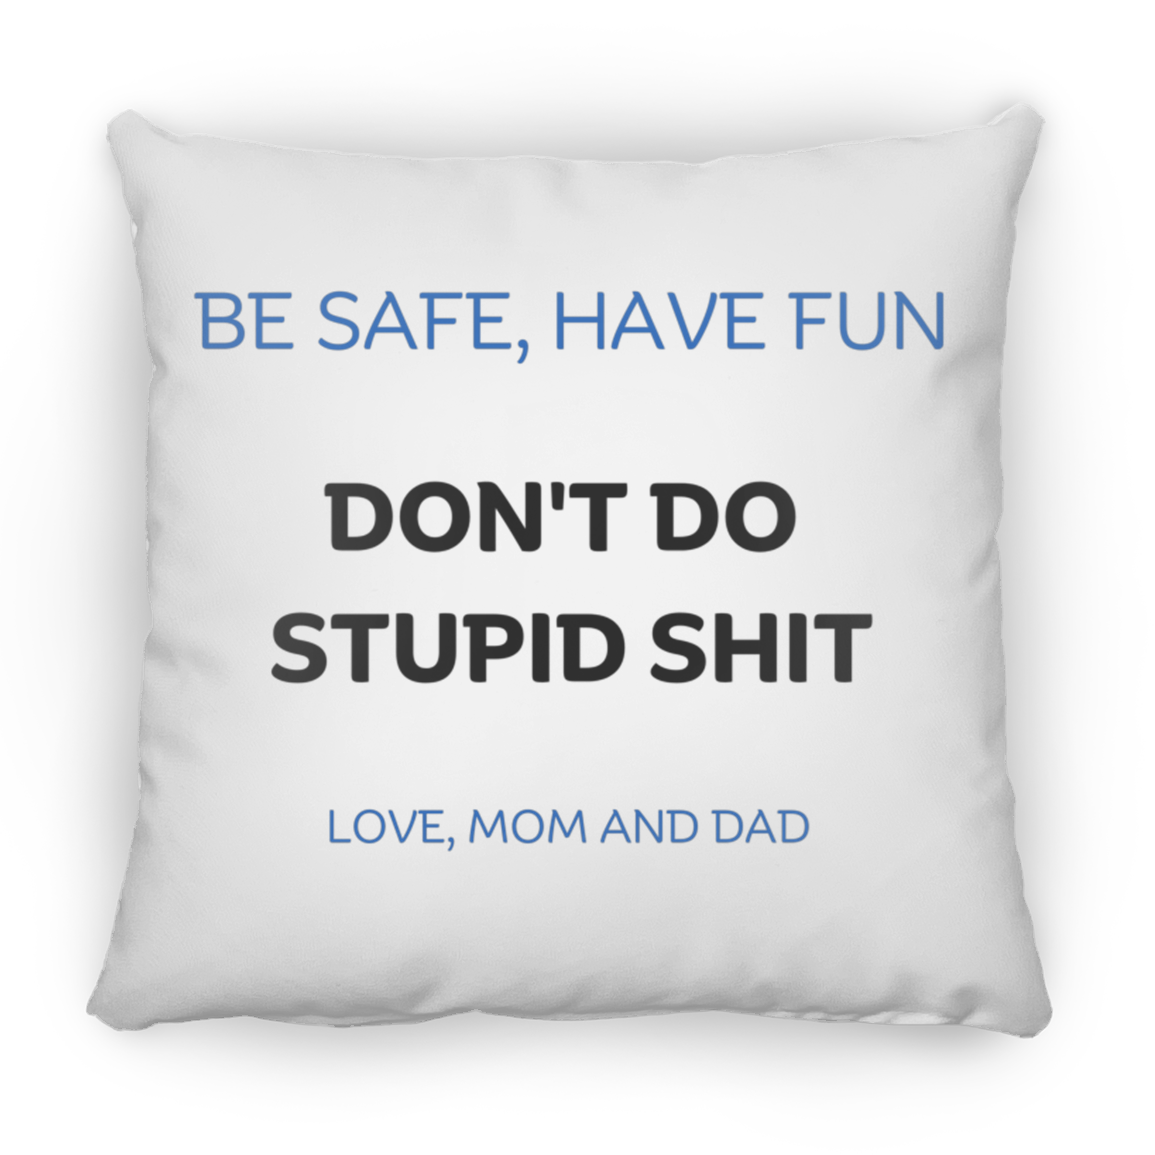 Get trendy with BE SAFE  Large Square Pillow - Housewares available at Good Gift Company. Grab yours for $25.36 today!